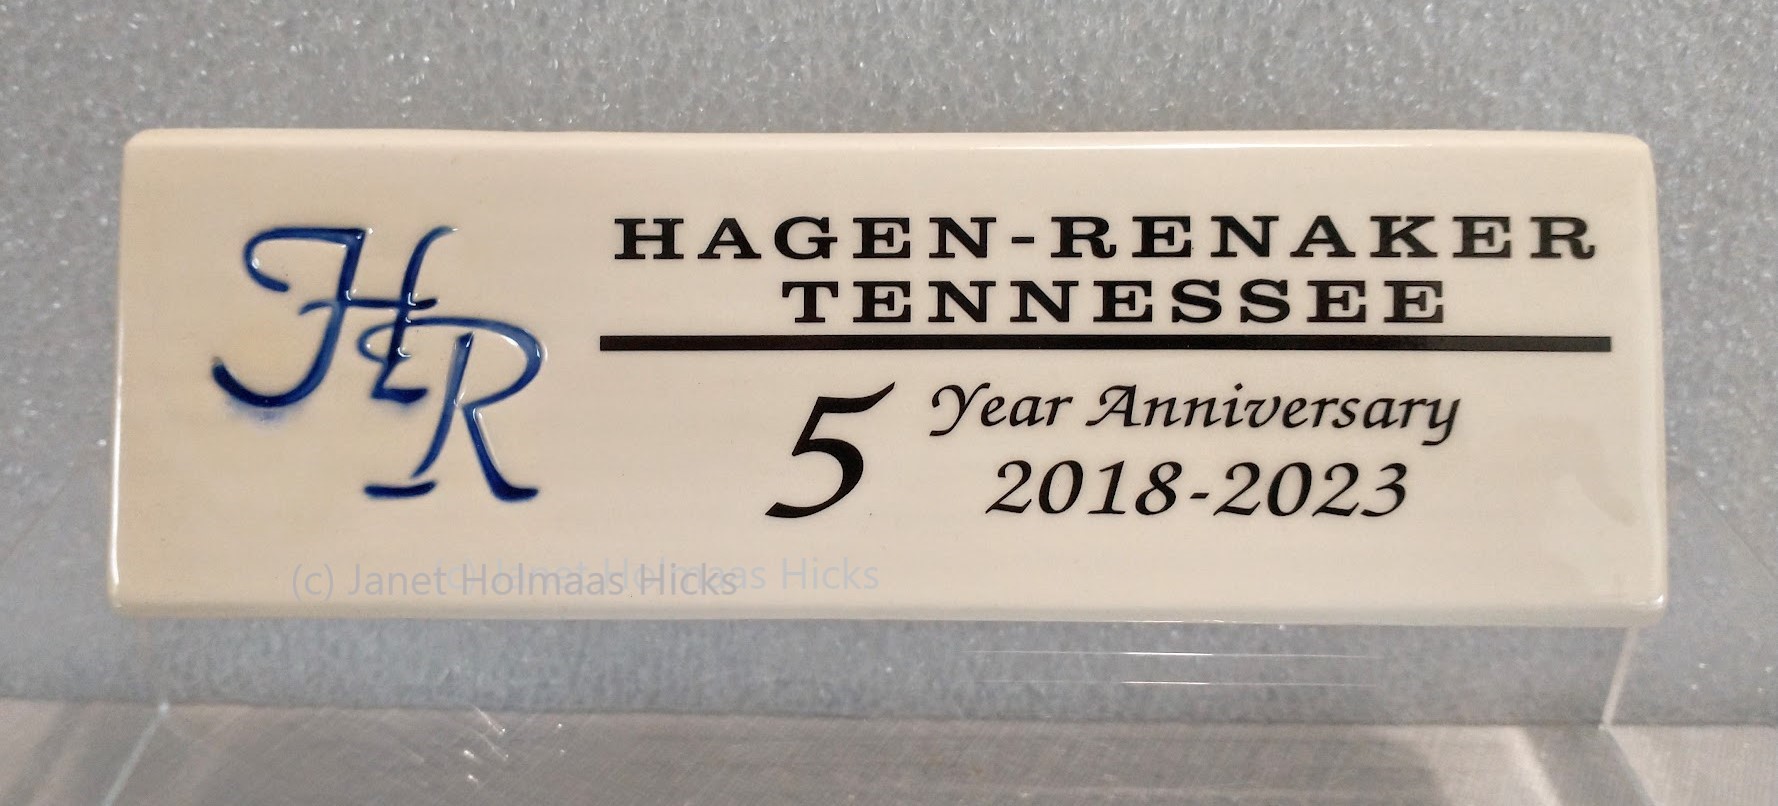 HR Tennessee 5th Anniversary sign main image